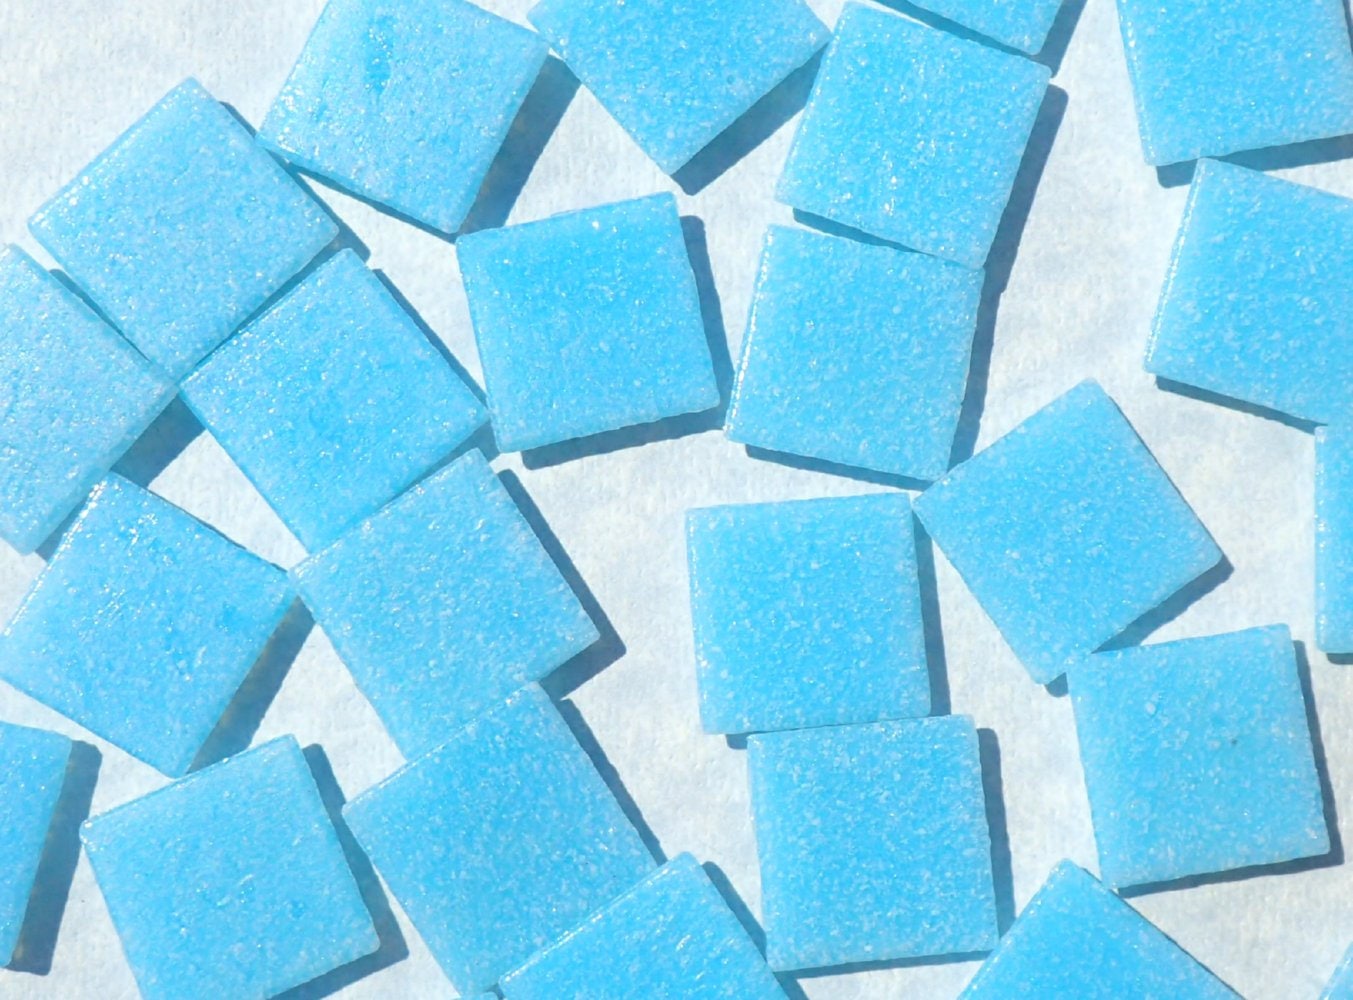 Light Blue Glass Mosaic Tiles Squares - 20mm - Half Pound of Sky Blue Vitreous Glass Tiles for Craft Projects - Approx 75 Tiles